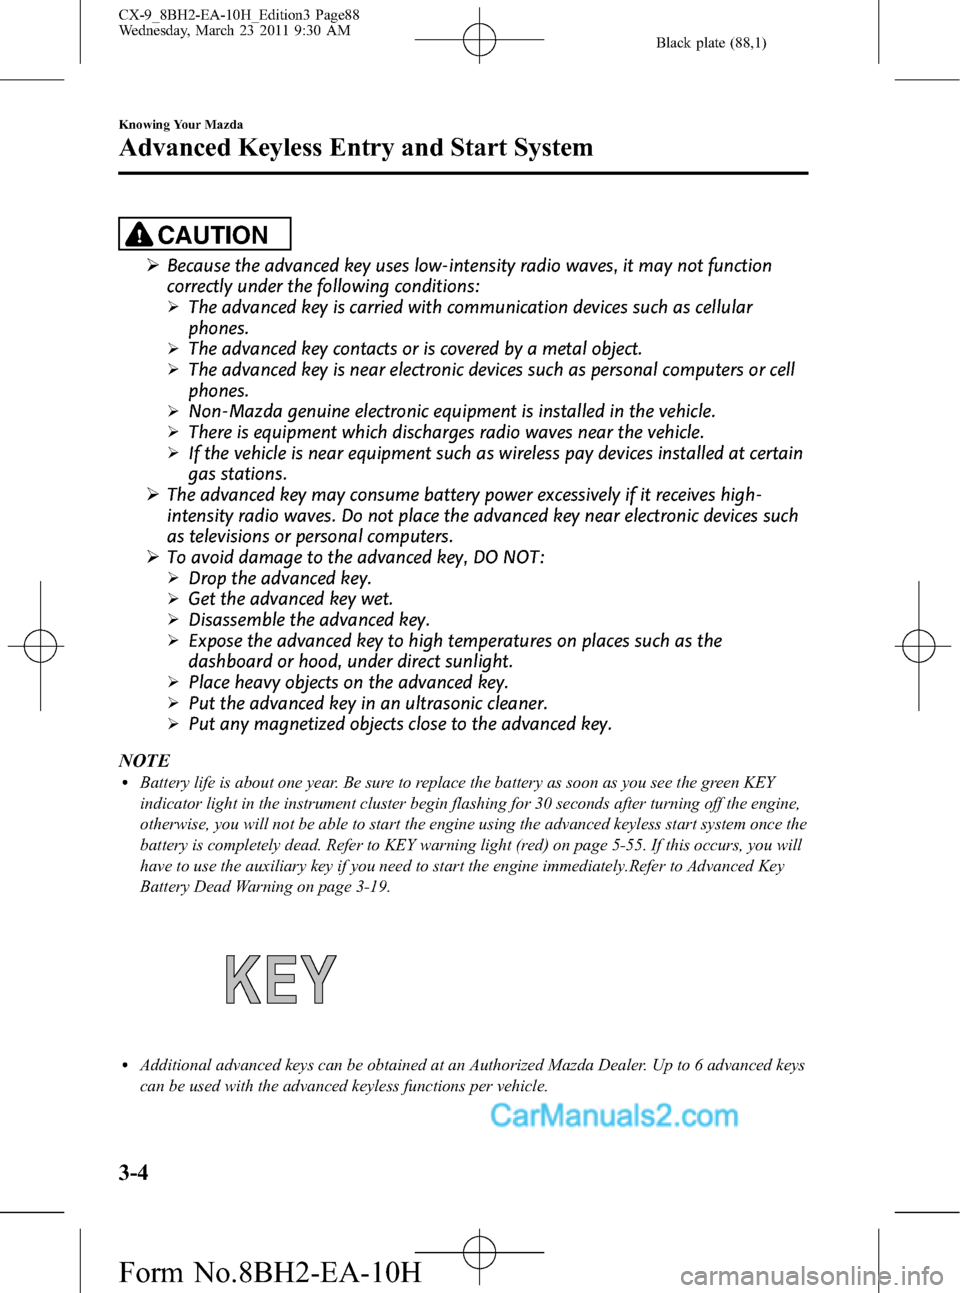 MAZDA MODEL CX-9 2011  Owners Manual (in English) Black plate (88,1)
CAUTION
ØBecause the advanced key uses low-intensity radio waves, it may not function
correctly under the following conditions:
ØThe advanced key is carried with communication dev